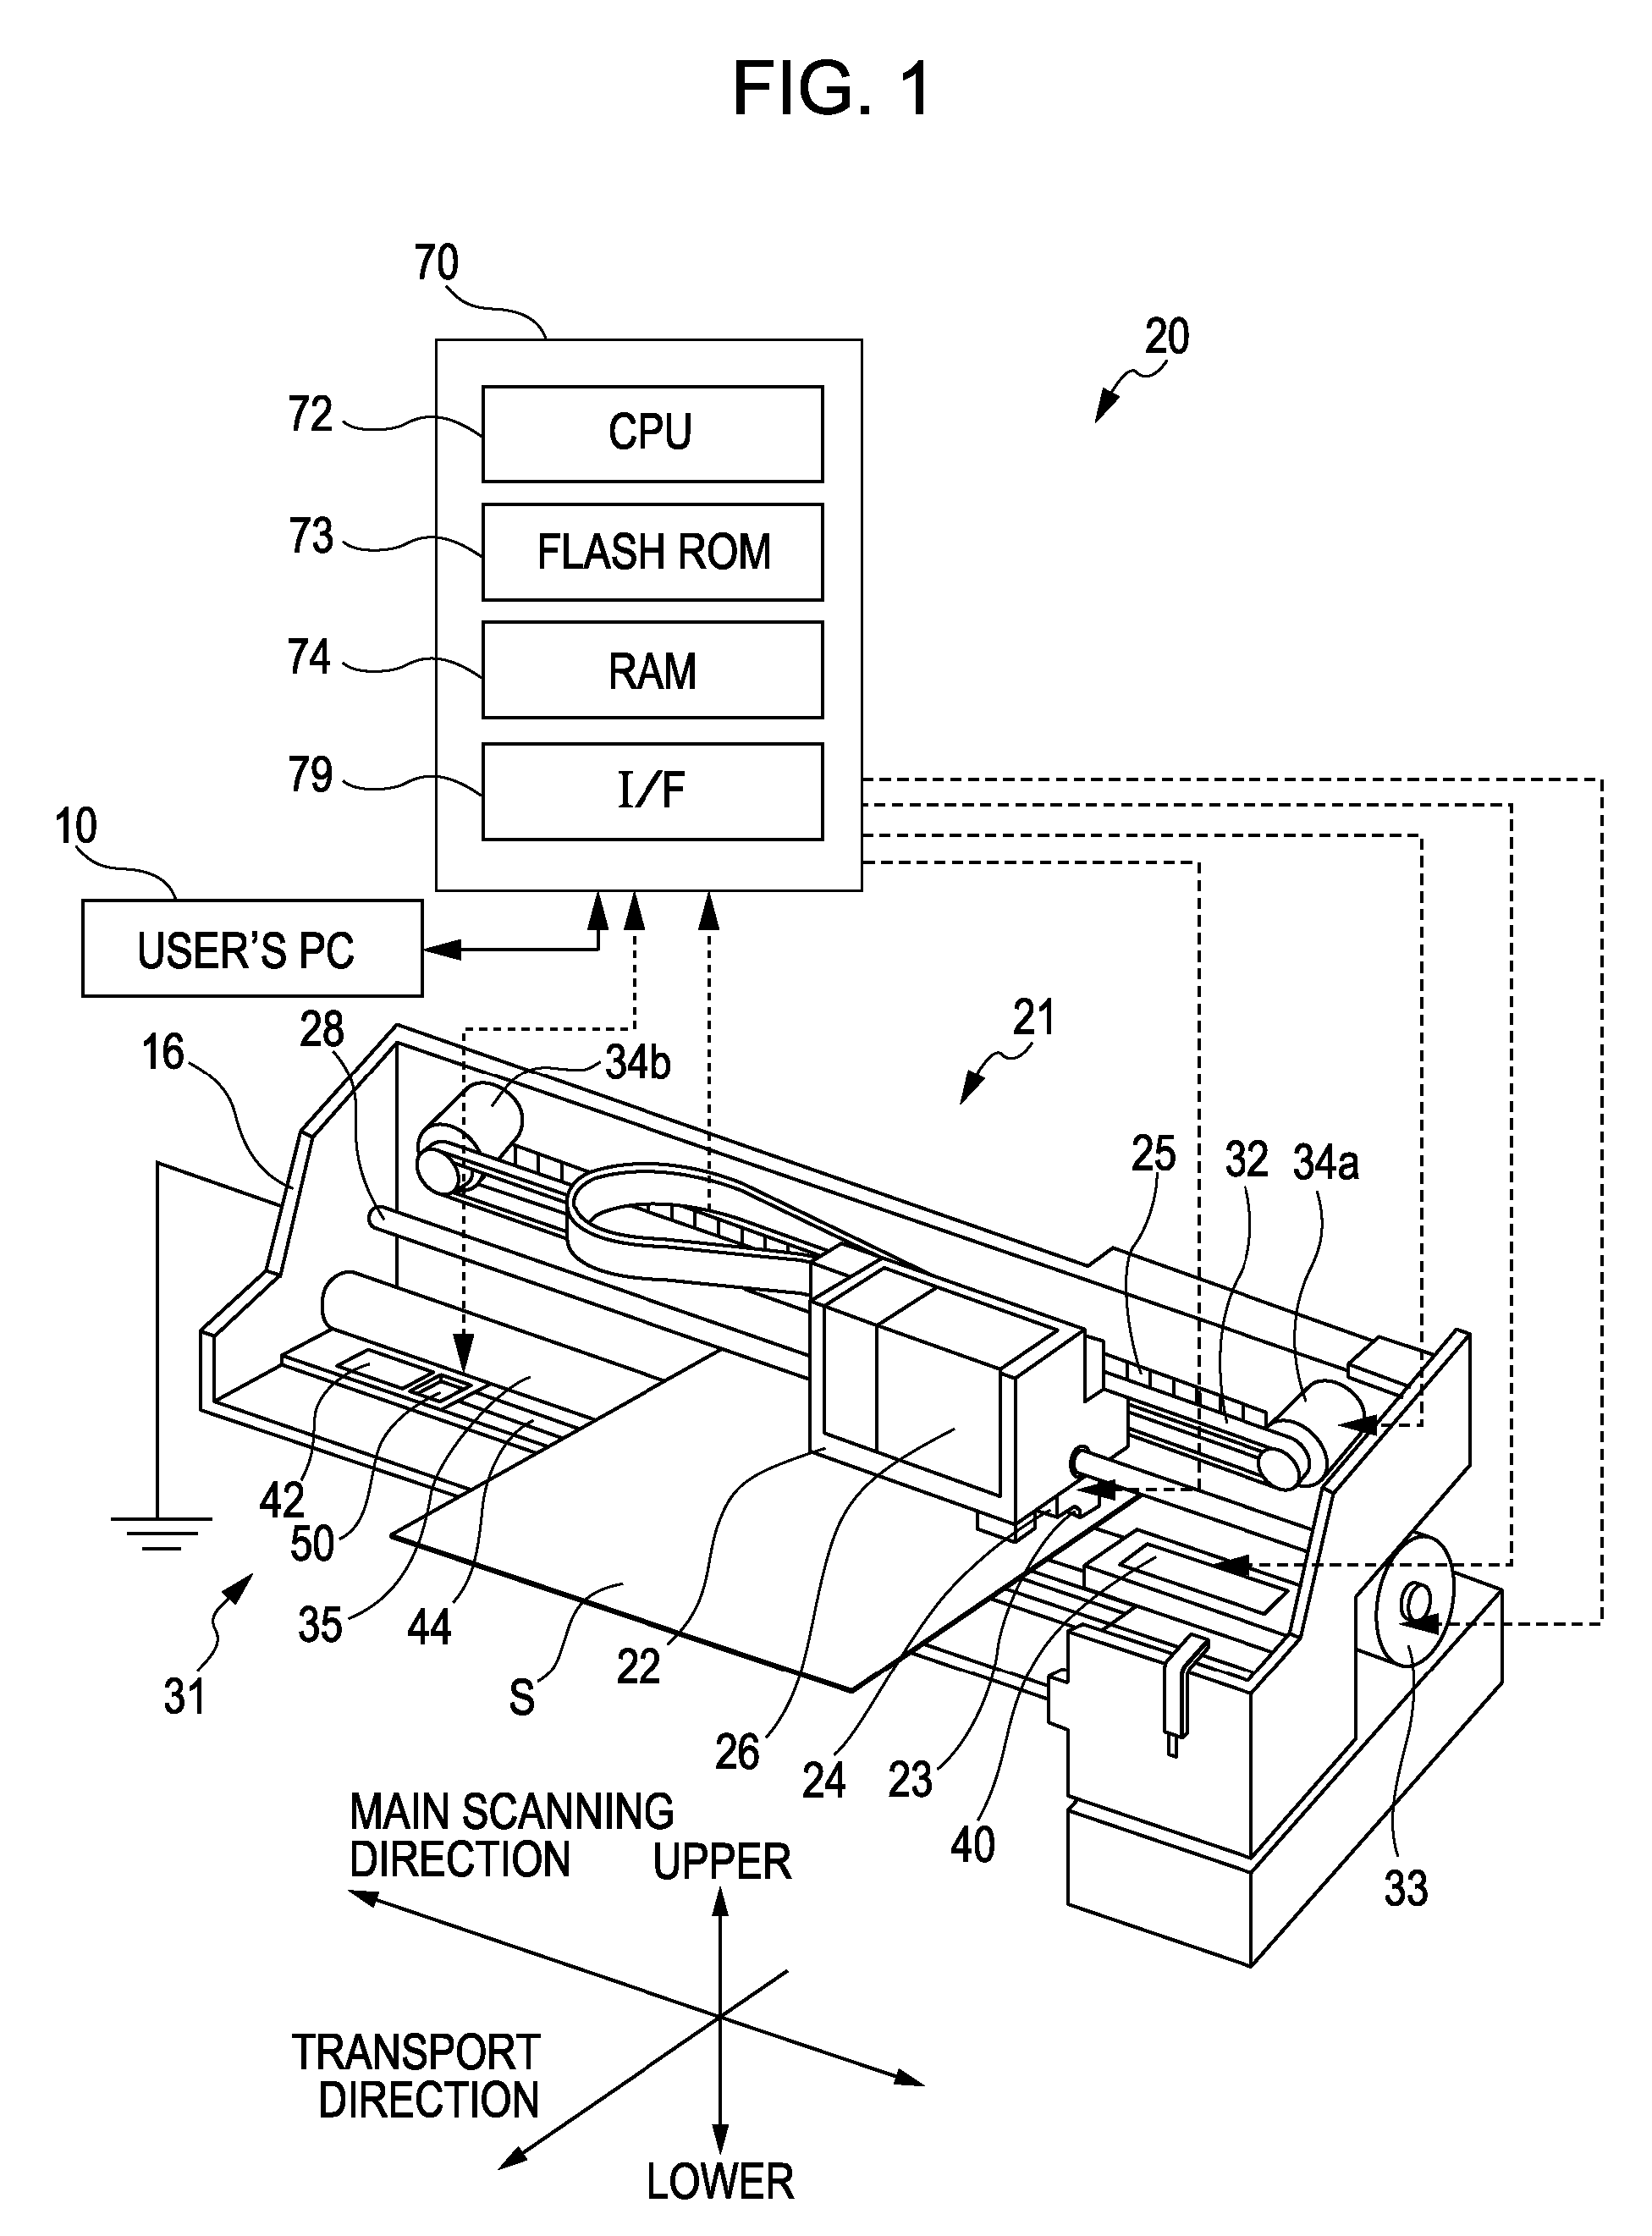 Liquid discharging apparatus, method of controlling the same, and program that implements the method